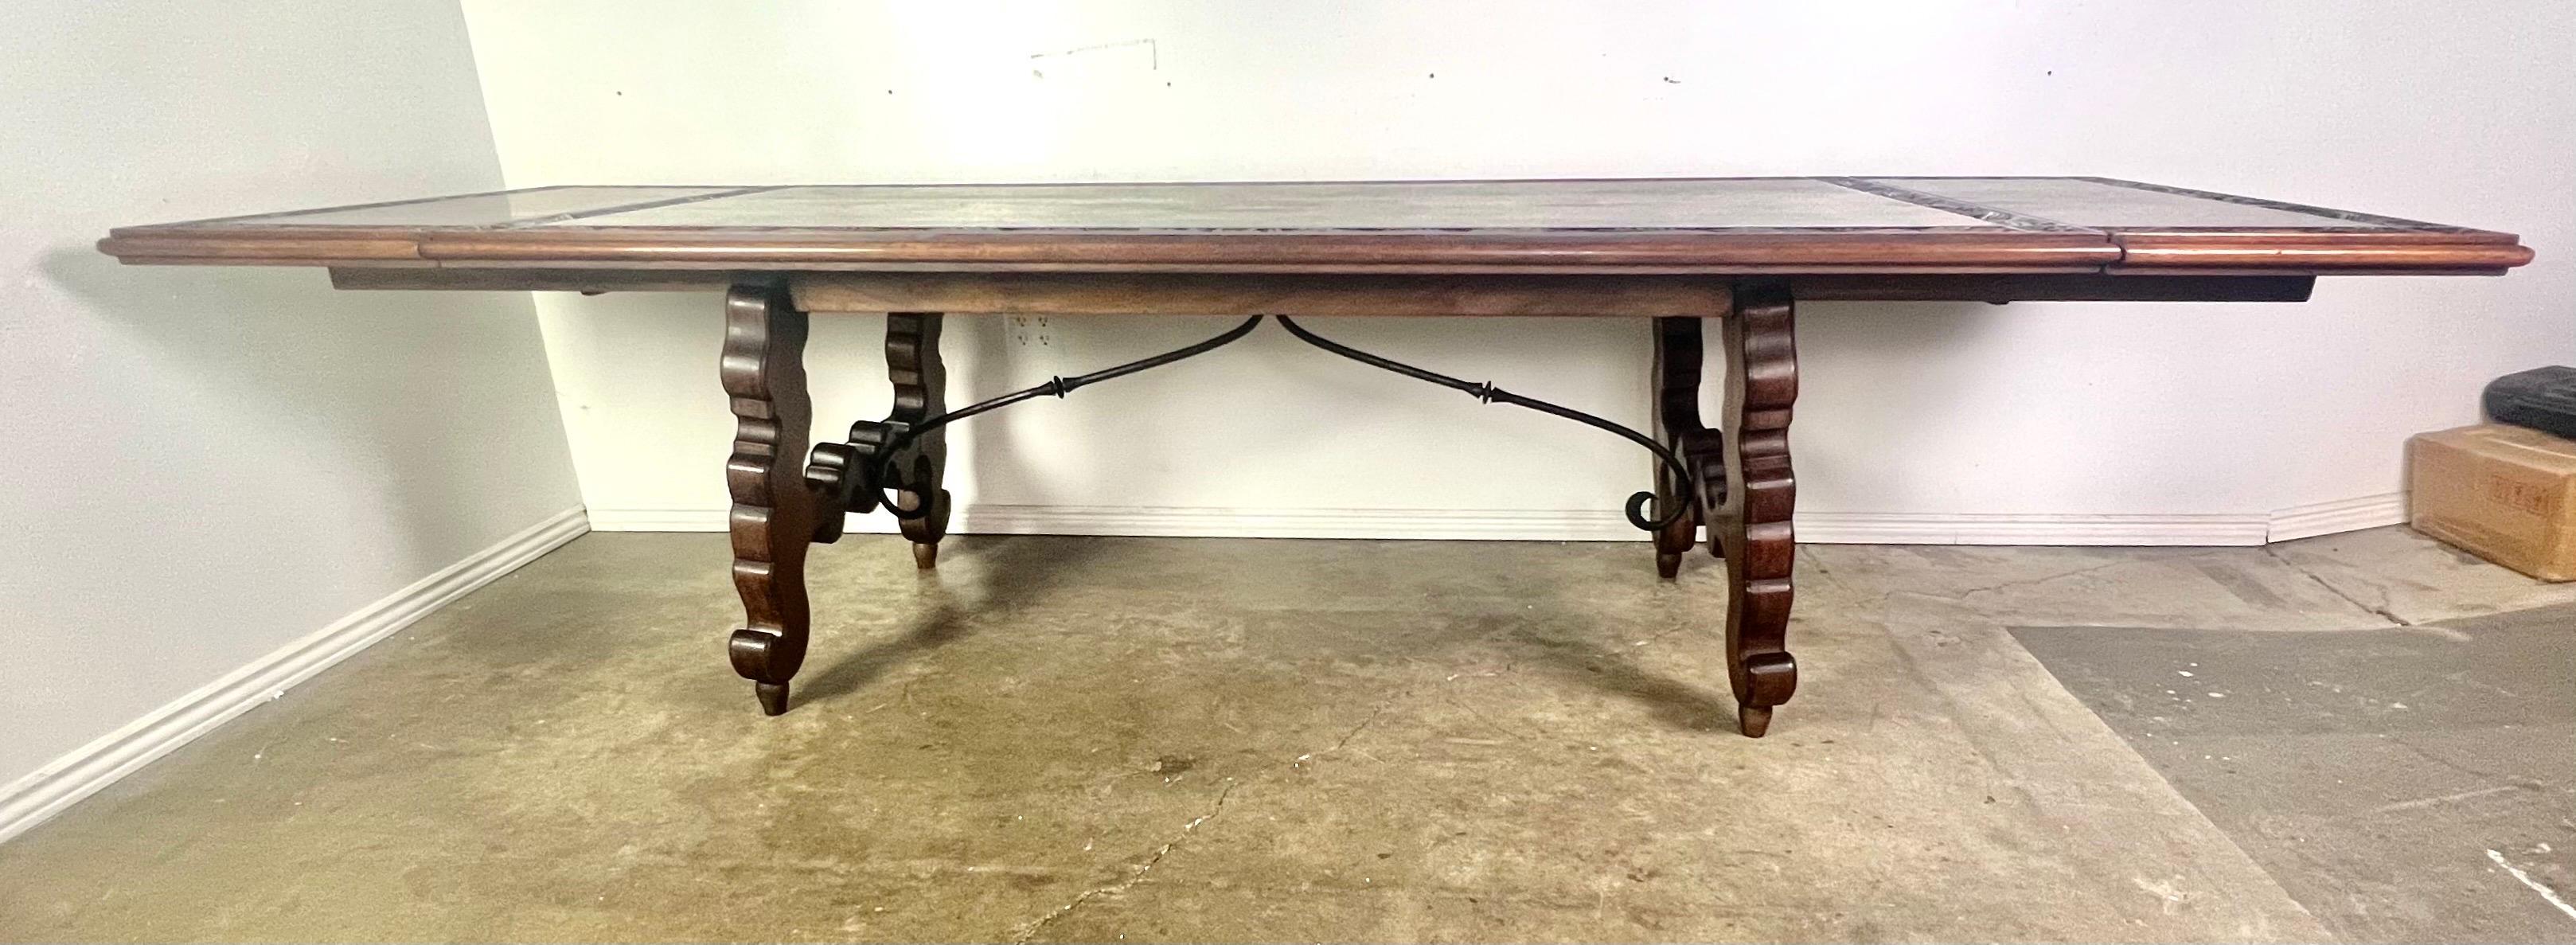 Early 20th Century Spanish Refractory Dining Table with Leaves For Sale 4